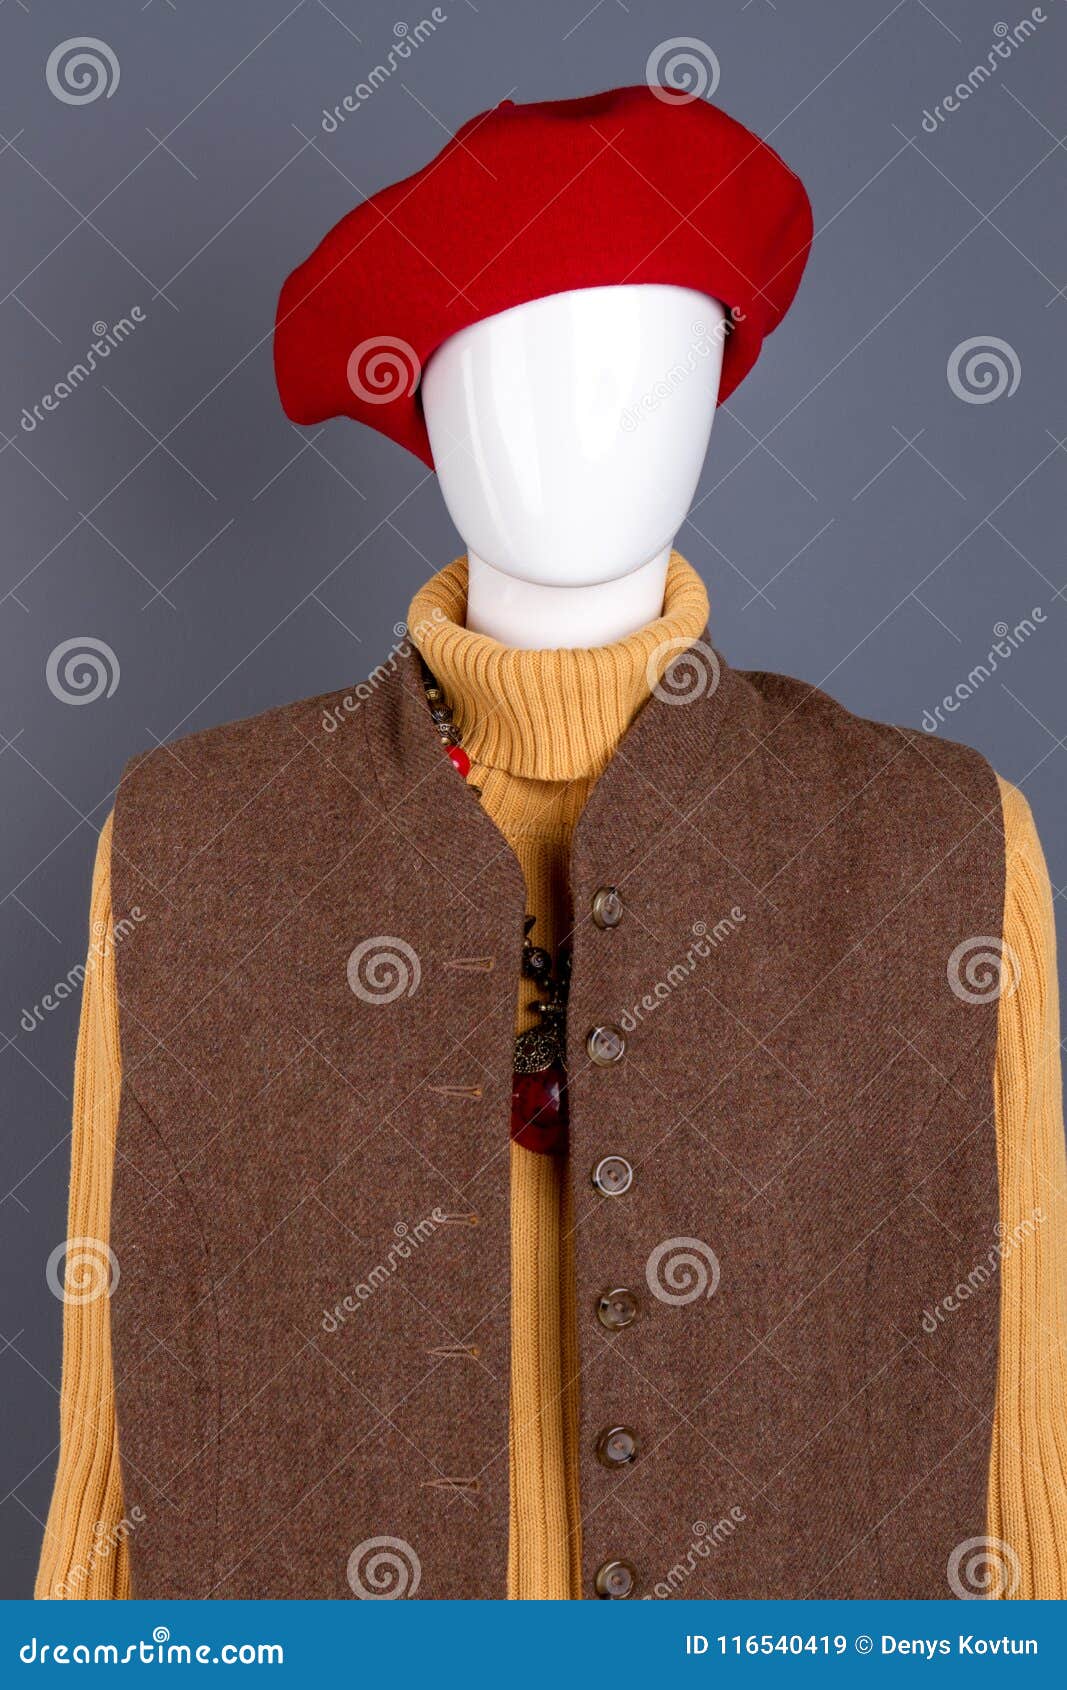 Red Women Beret and Brown Waistcoat. Stock Image - Image of female ...